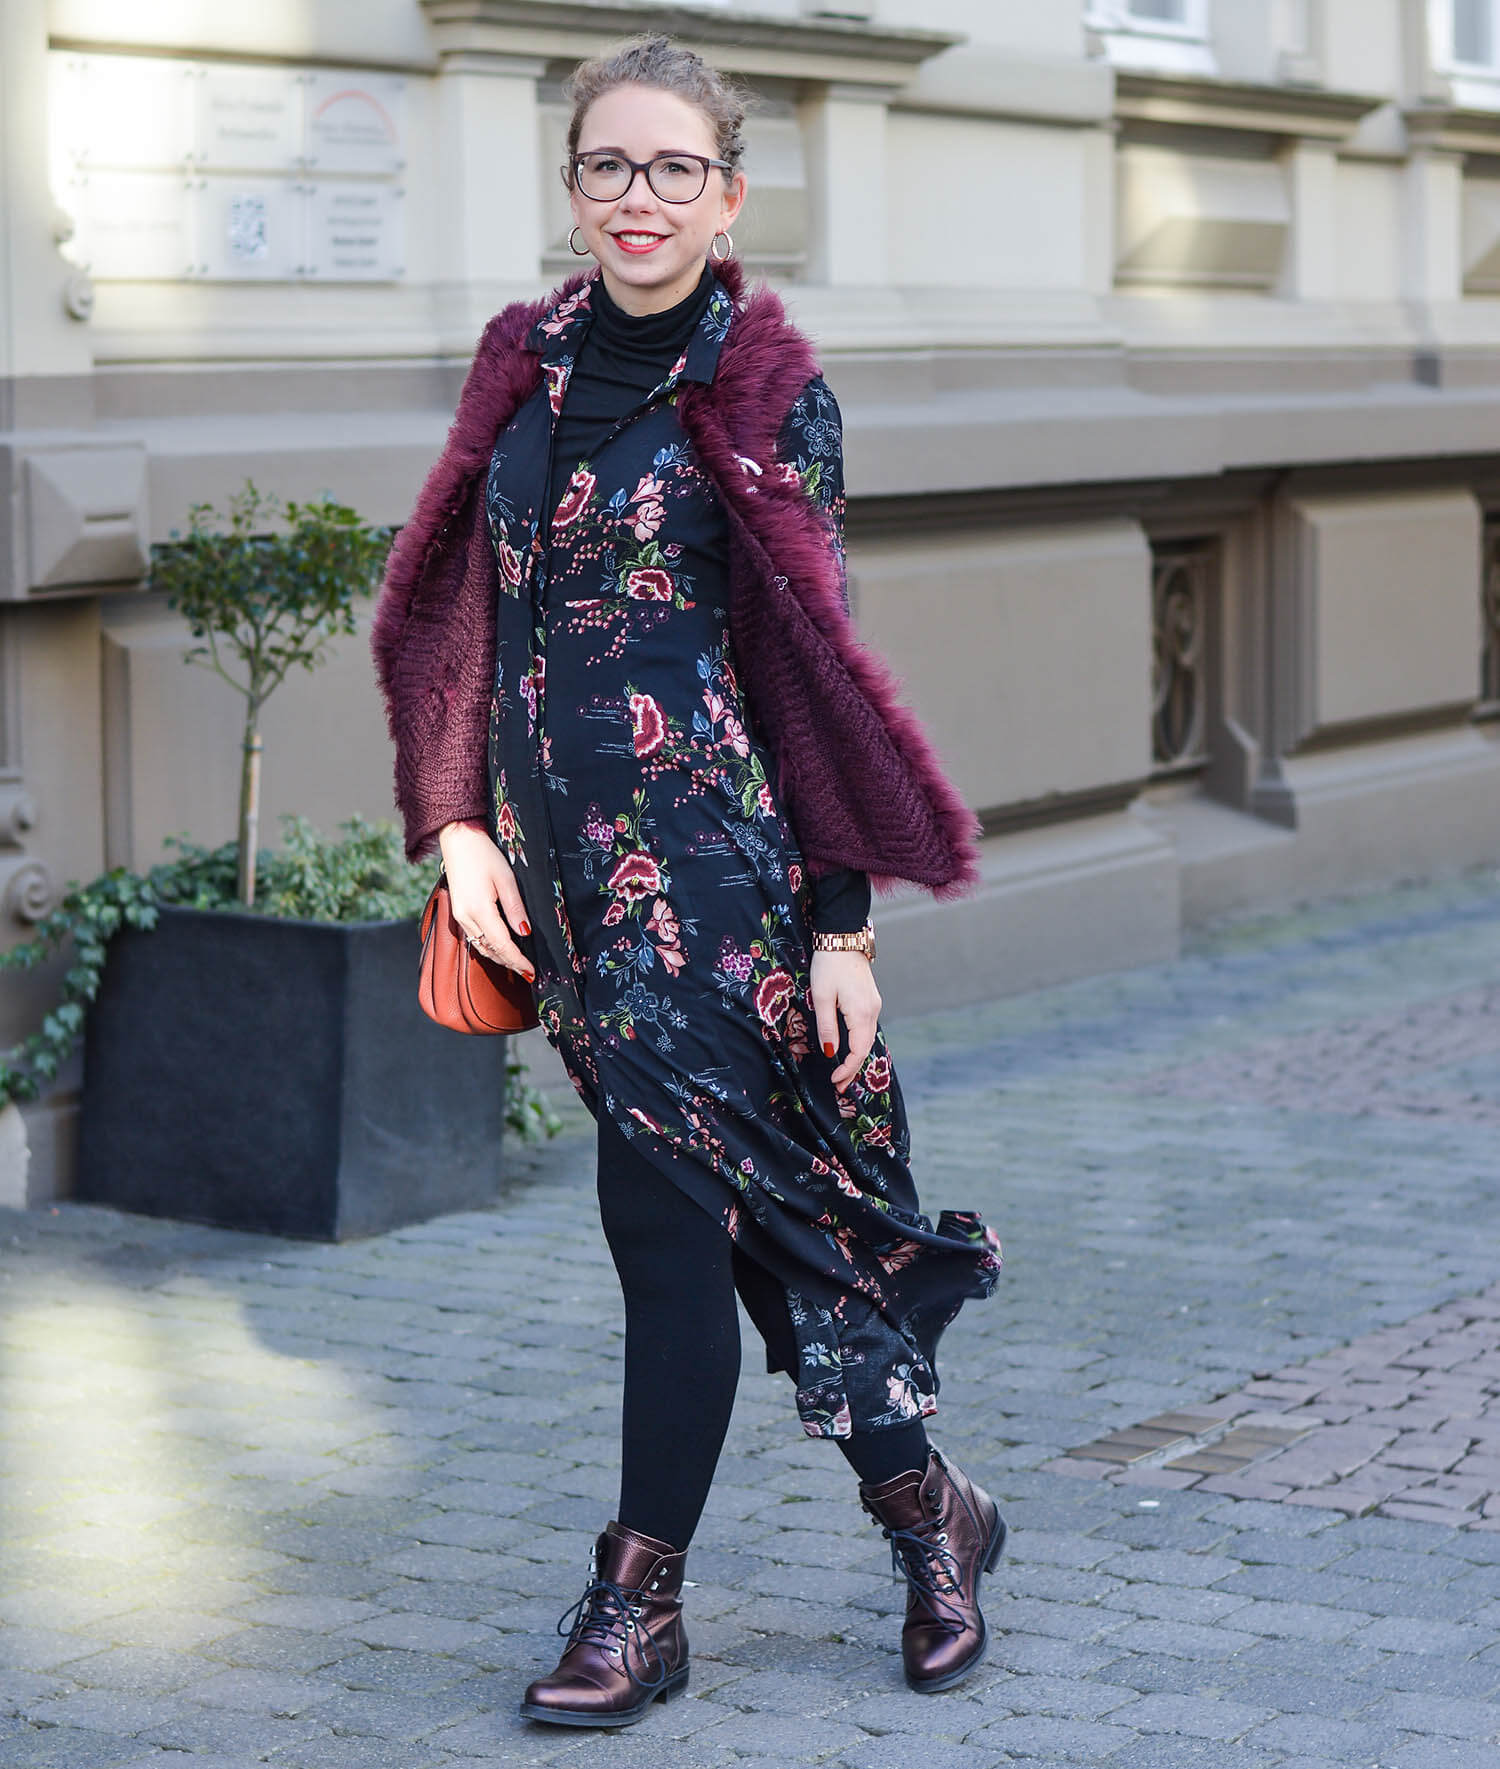 Outfit-Zara-Flower-Dress-Feather-Vest-and-metallic-Boots-kationette-fashionblogger-nrw